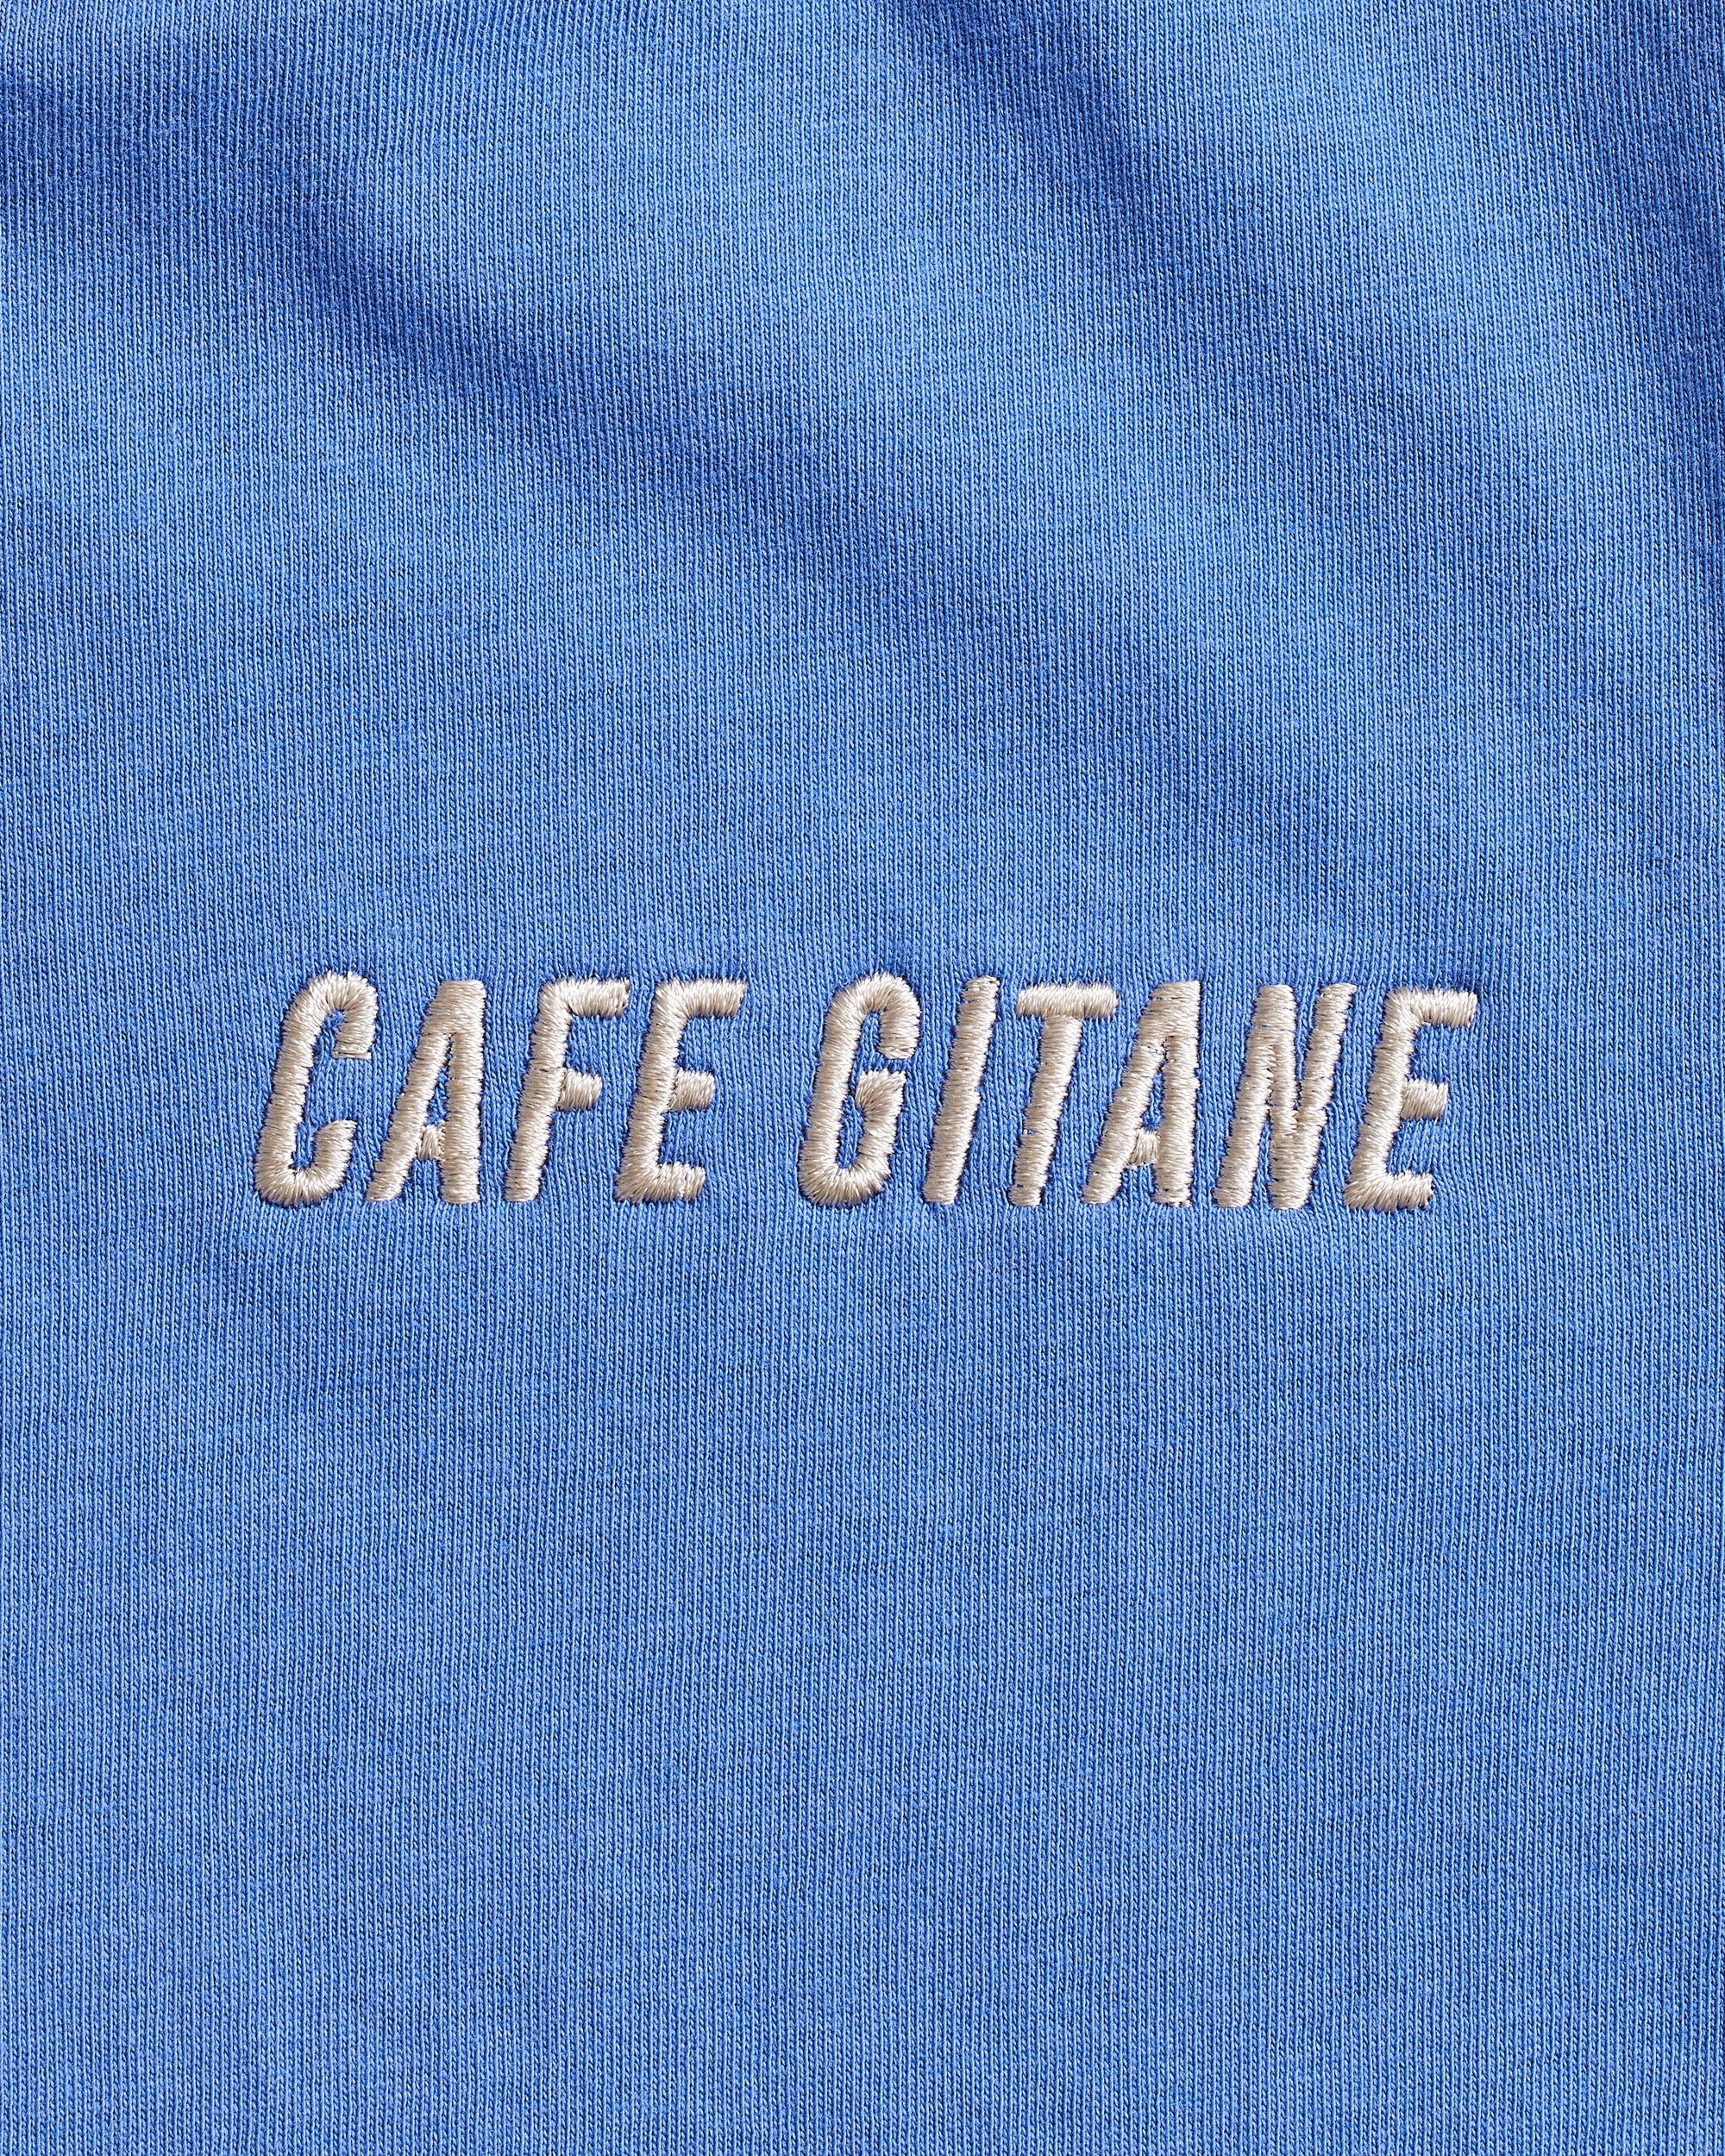 The Cafe Gitane Vintage Wash Embroidered Tee is 100% ring spun cotton and made in the USA. The classic t-shirt in sky blue is embroidered on the left chest in a silver-gray thread. The t-shirt is pigment dyed which means that it has a sublet vintage look and will get more wash the older it gets.